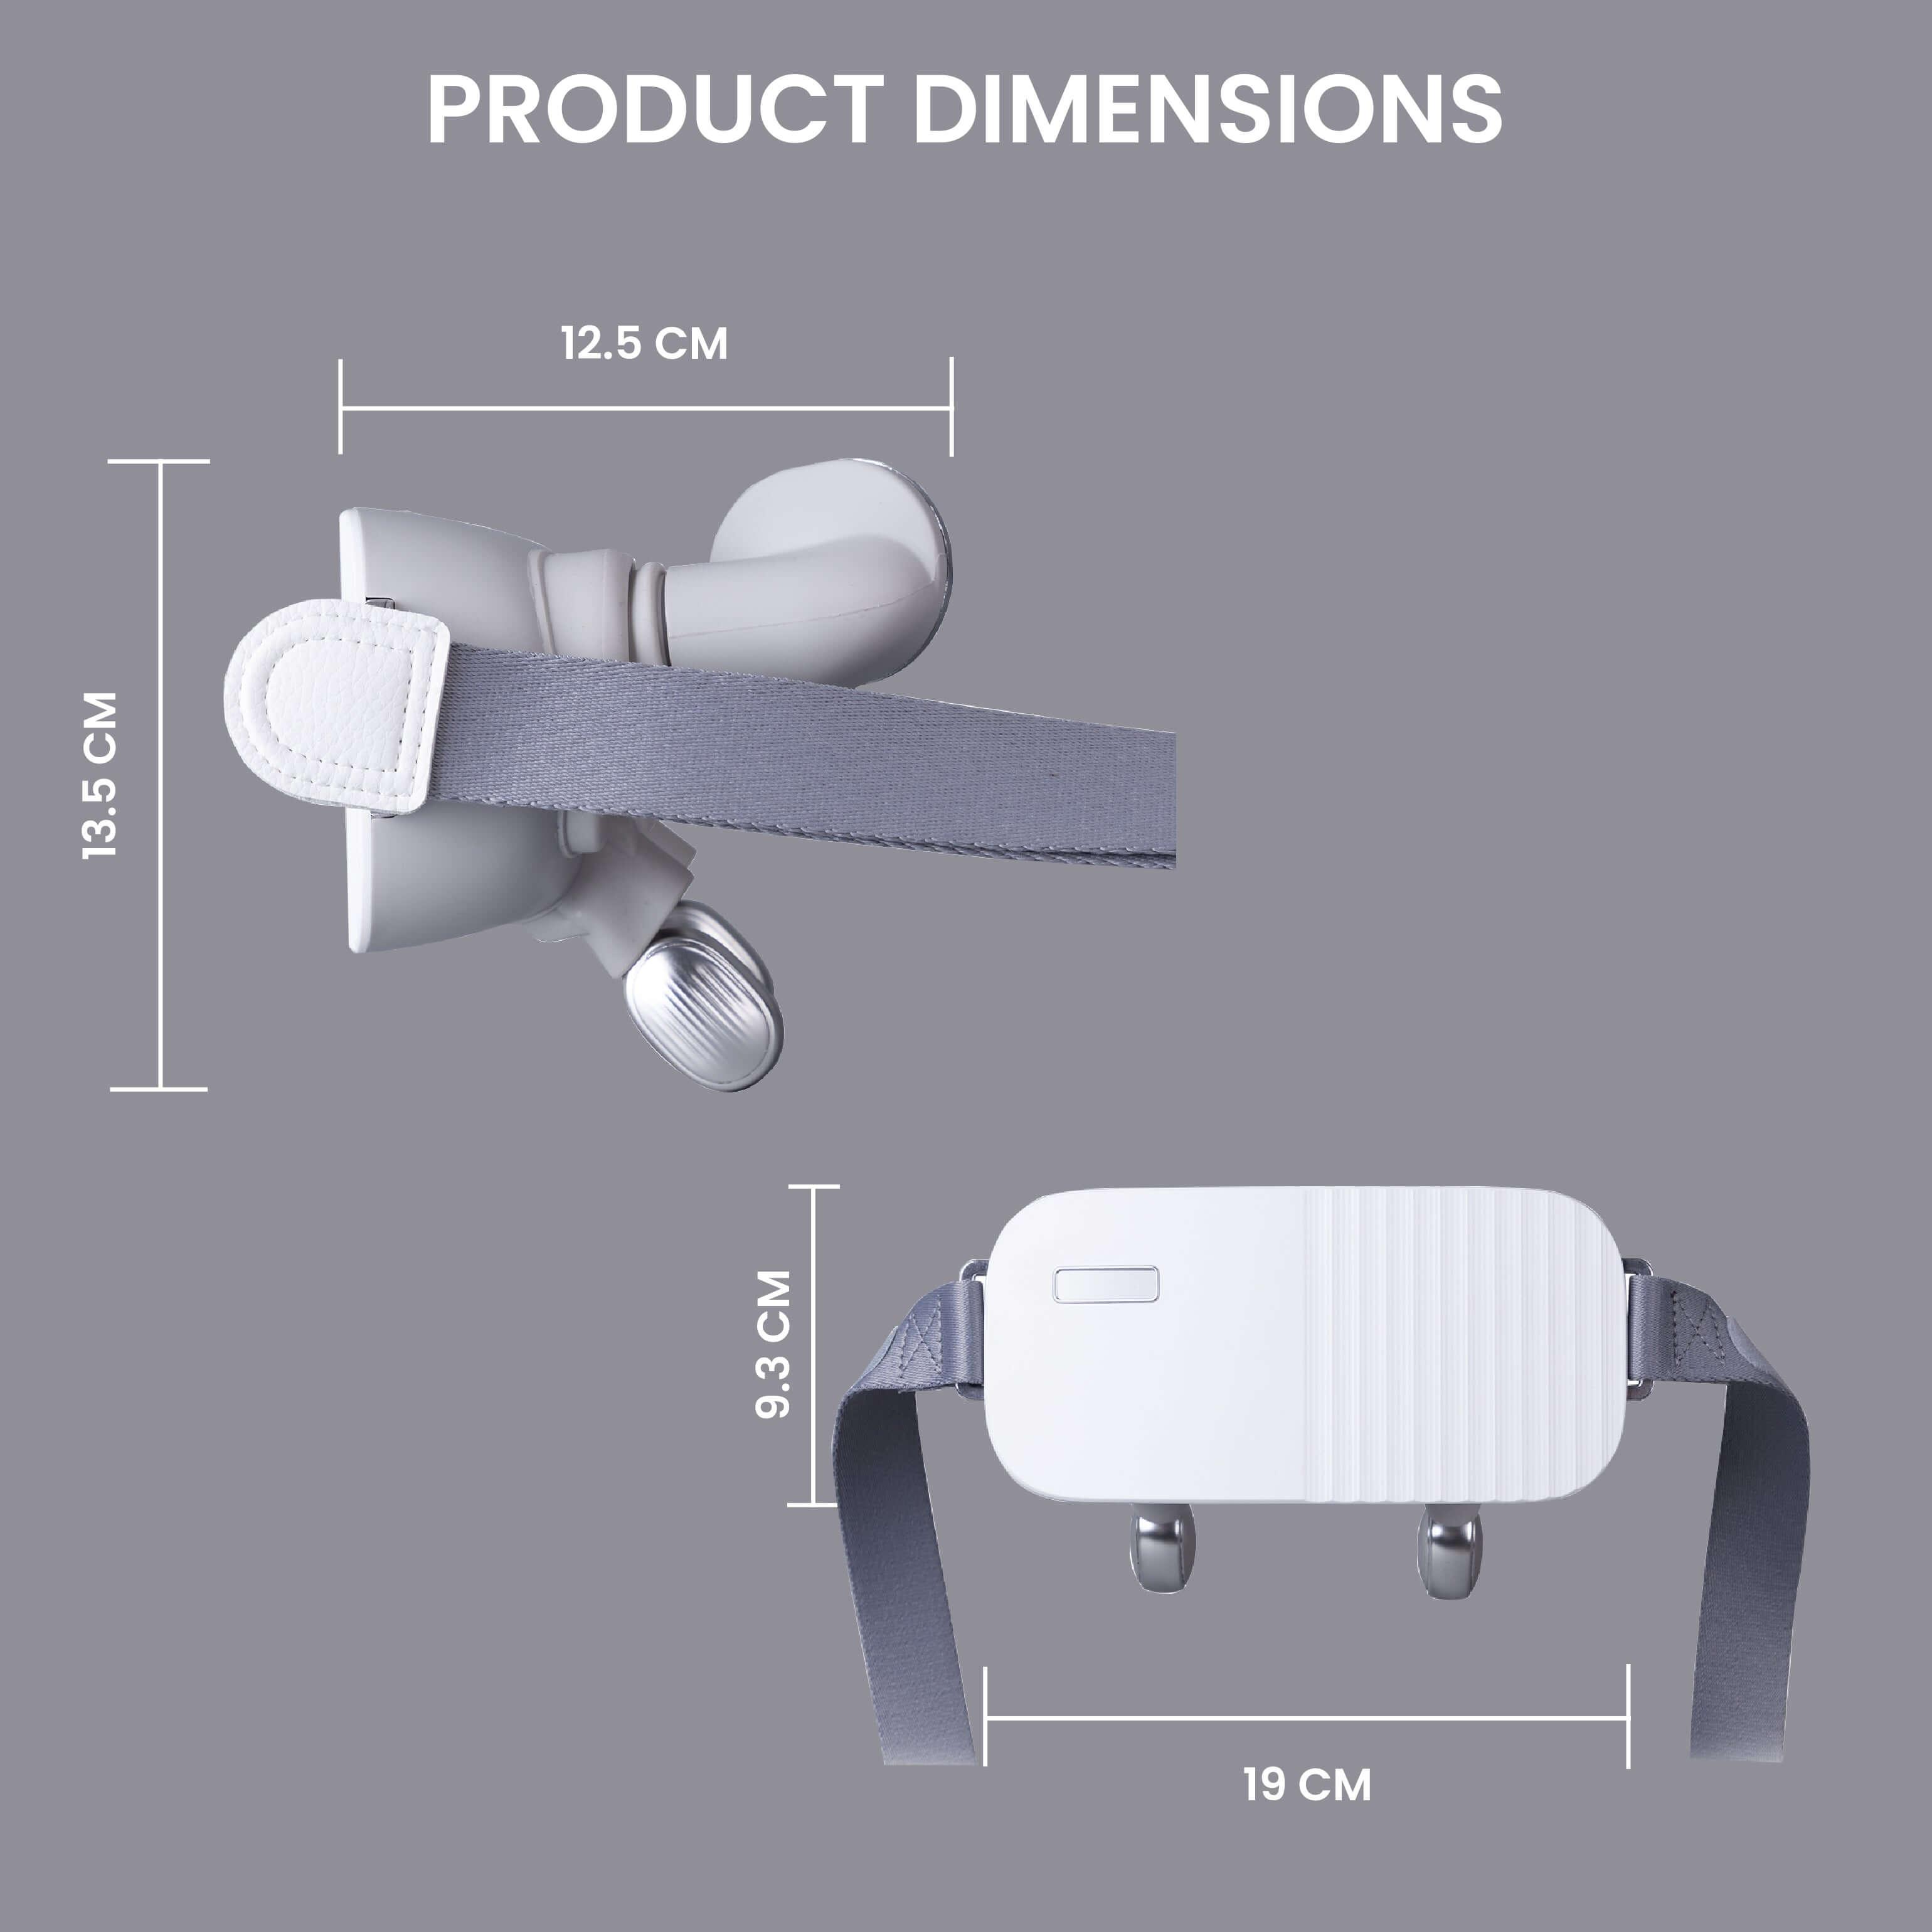 Product dimensions of a neck and shoulder massager with adjustable straps, showcasing width, length, and height measurements